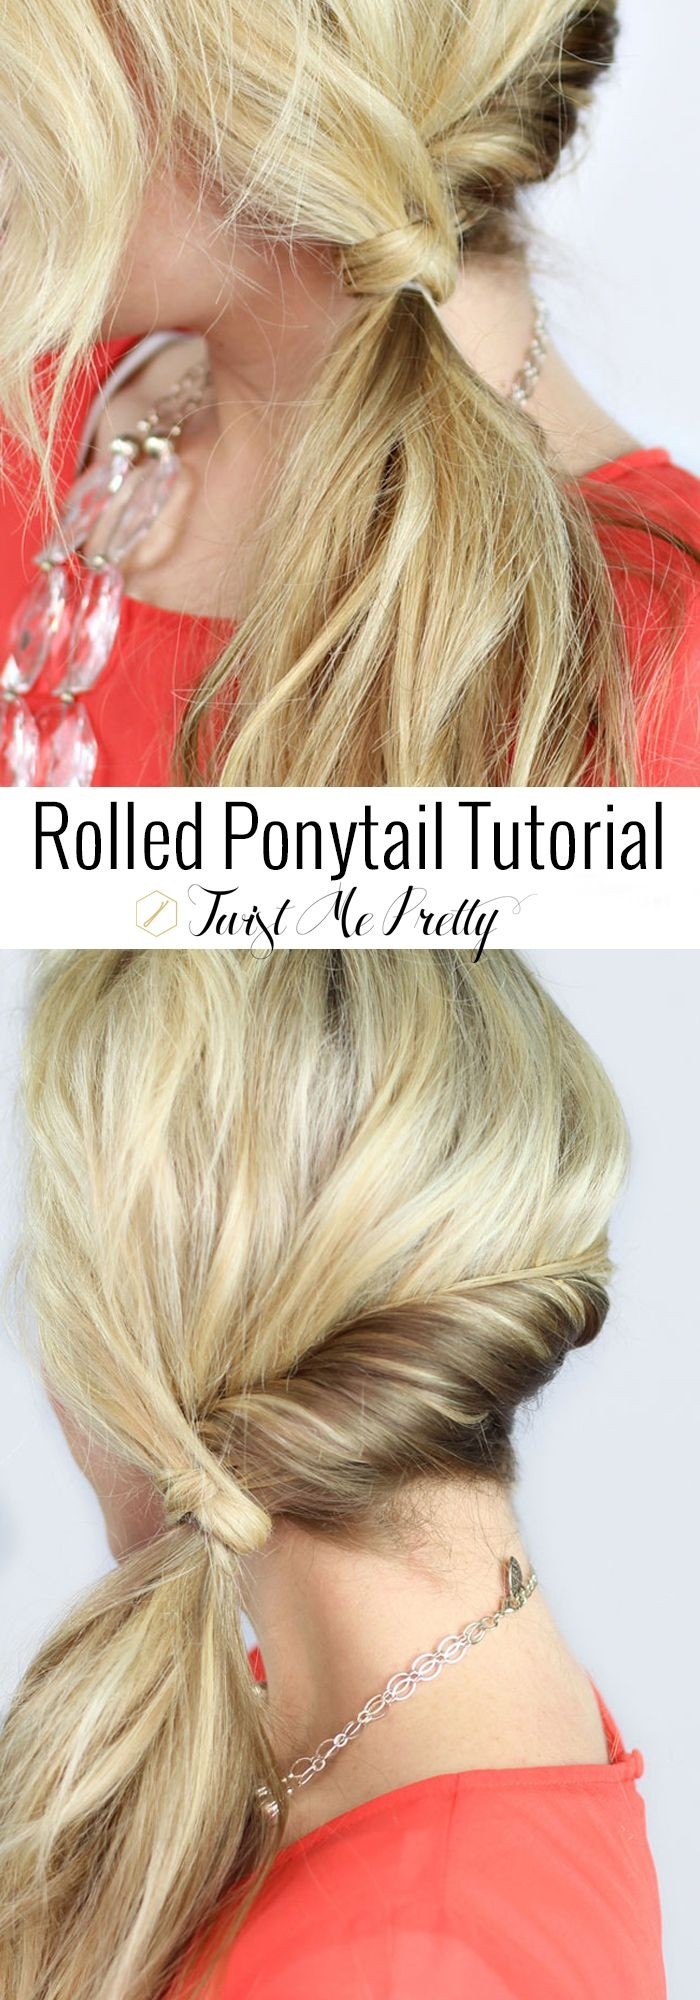 Rolled Ponytail Tutorial